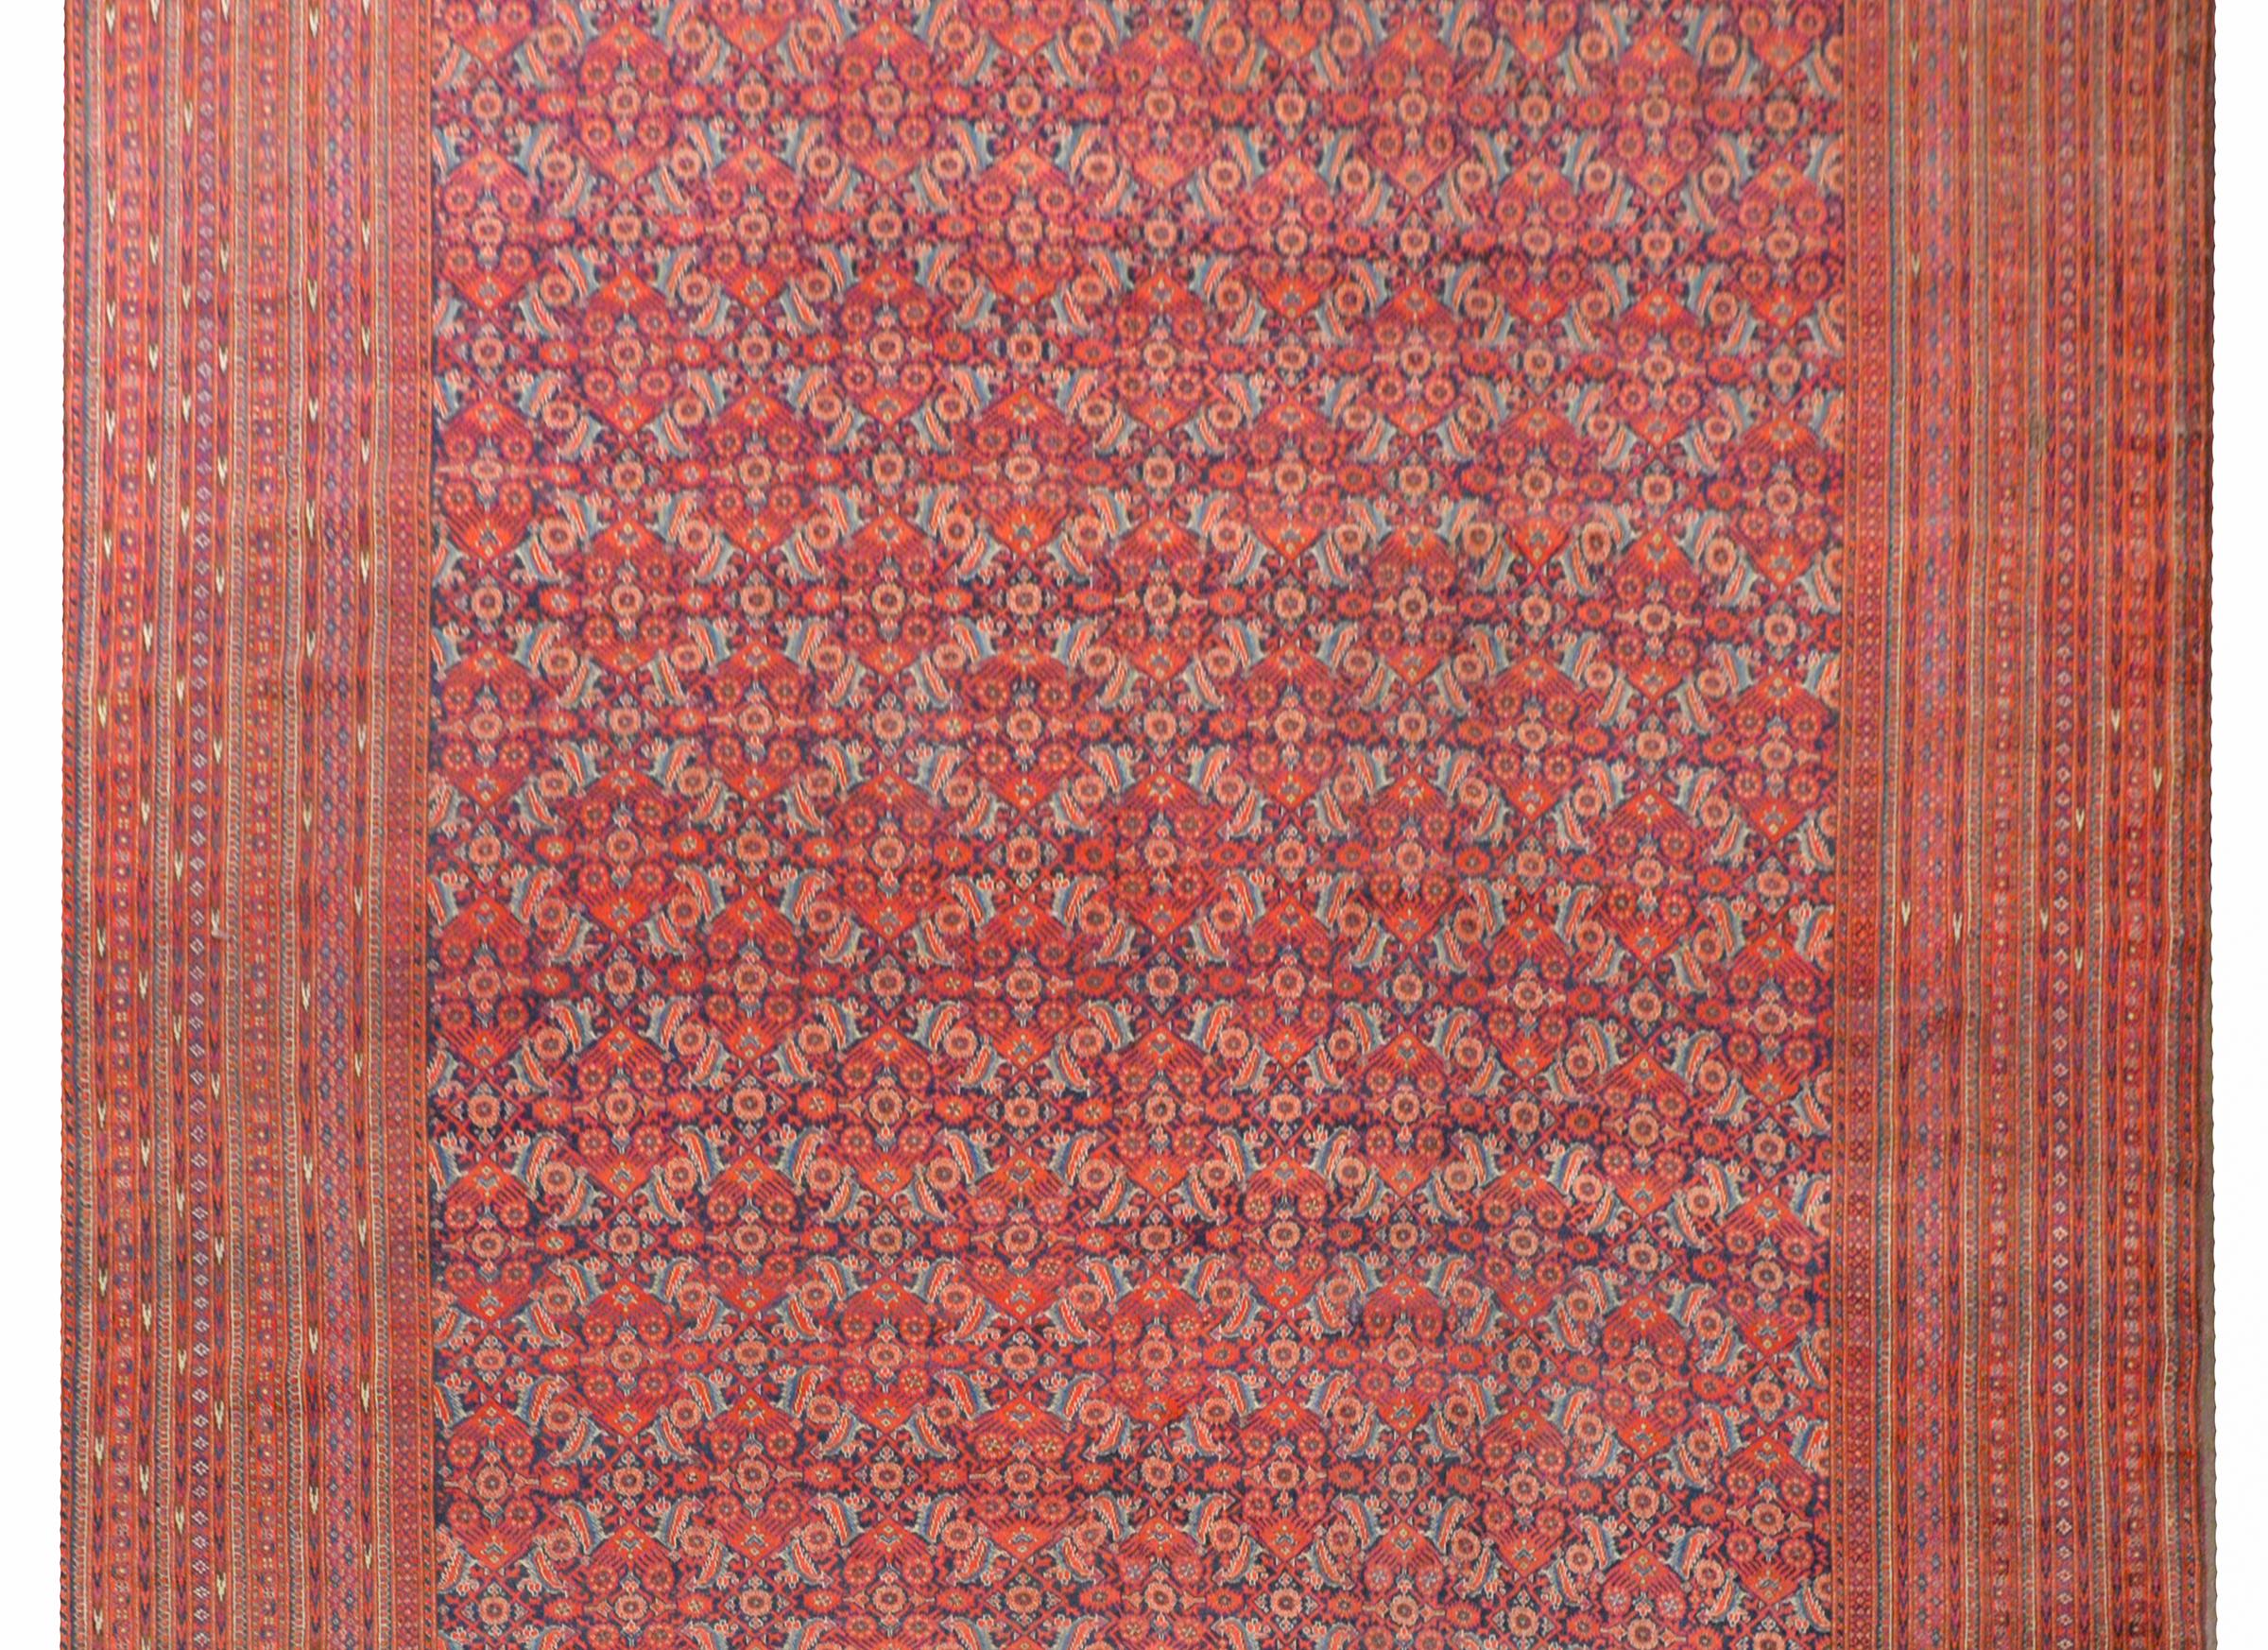 An outstanding early 20th century palatial-size Afghani Bashir rug with a rare and wonderful all-over floral and leaf lattice pattern woven in crimson, light and dark indigo, on a dark indigo background. The border is extraordinary with several